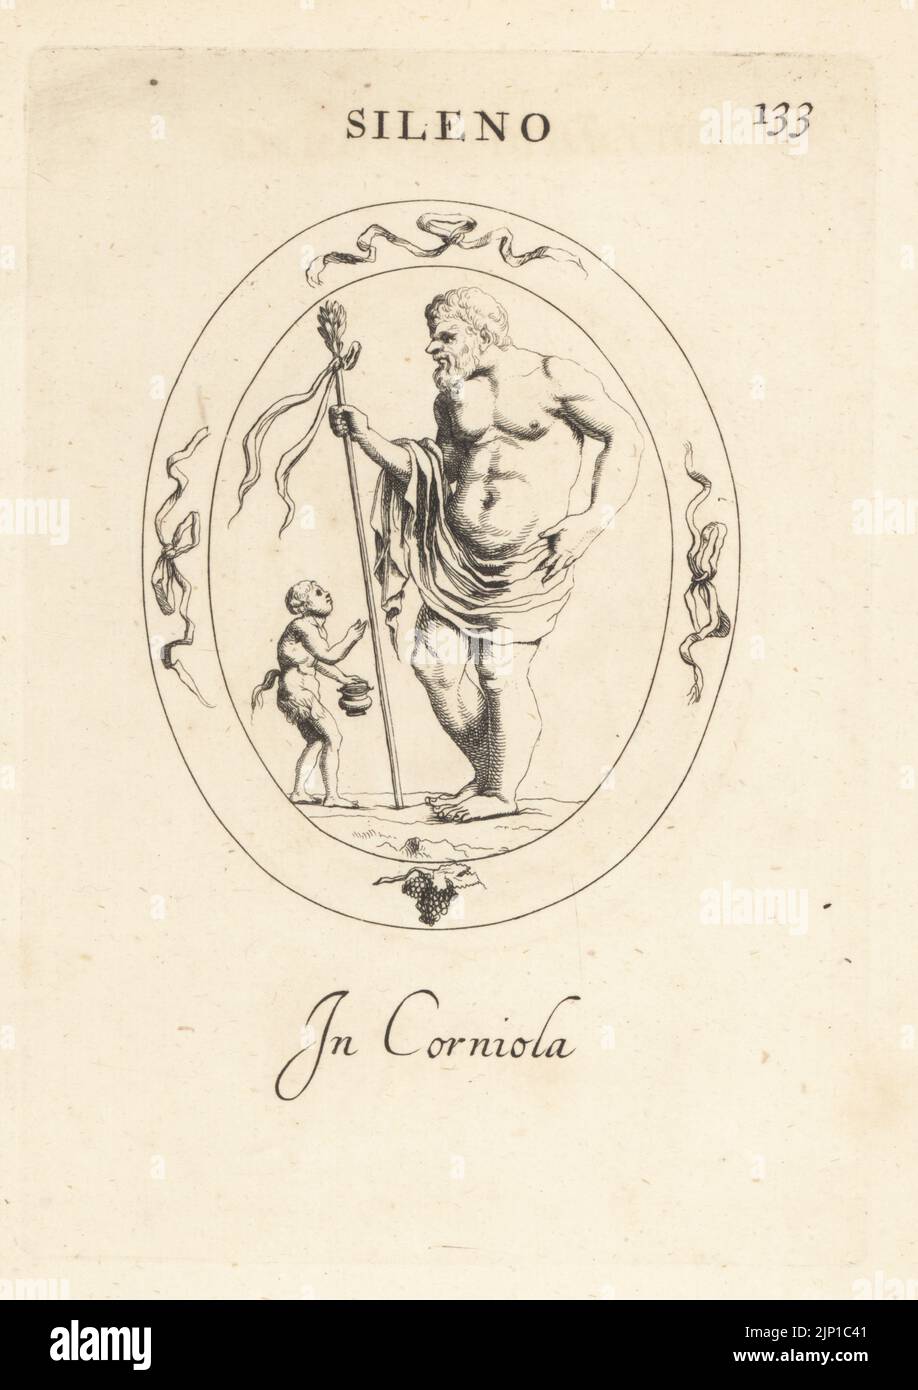 Figure of bearded satyr Silenus, companion to the Greek god of wine Dionysus, with faun, bunch of grapes and ribbons in the boder.. In carnelian. Sileno. In corniola. Copperplate engraving by Giovanni Battista Galestruzzi after Leonardo Agostini from Gemmae et Sculpturae Antiquae Depicti ab Leonardo Augustino Senesi, Abraham Blooteling, Amsterdam, 1685. Stock Photo